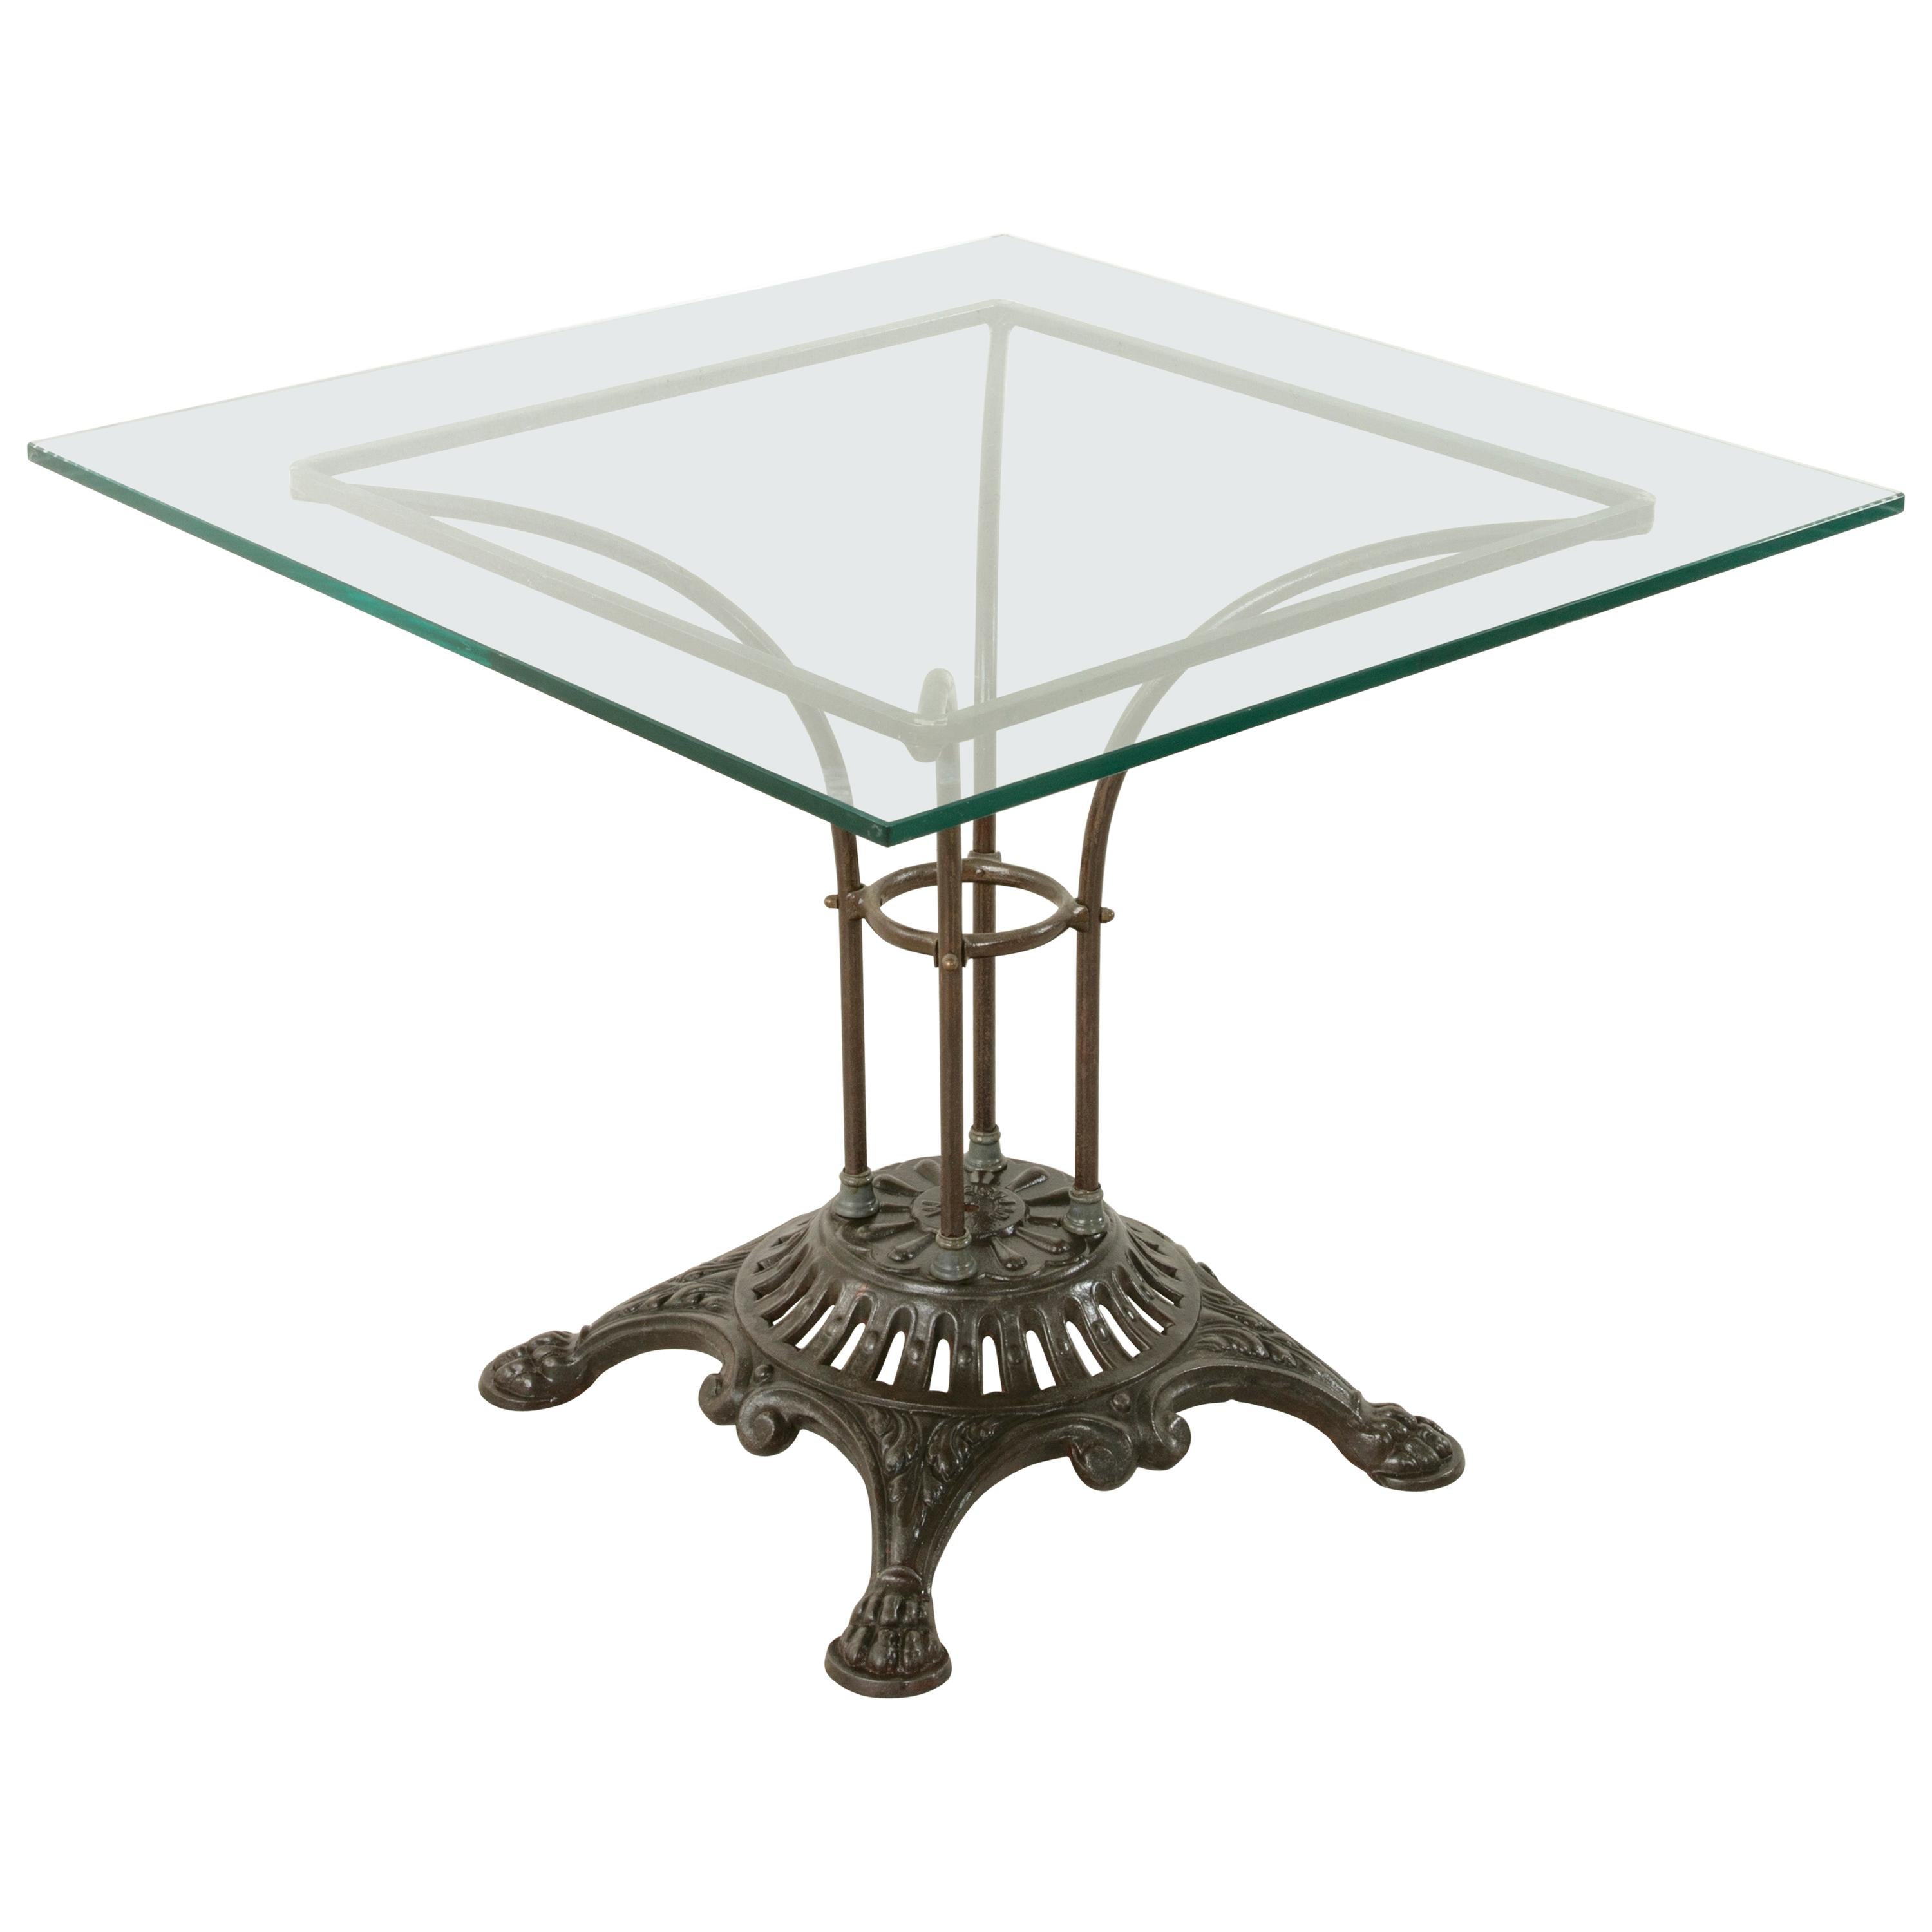 French Garden Table with Pierced Iron Base and Square Glass Top, circa 1900